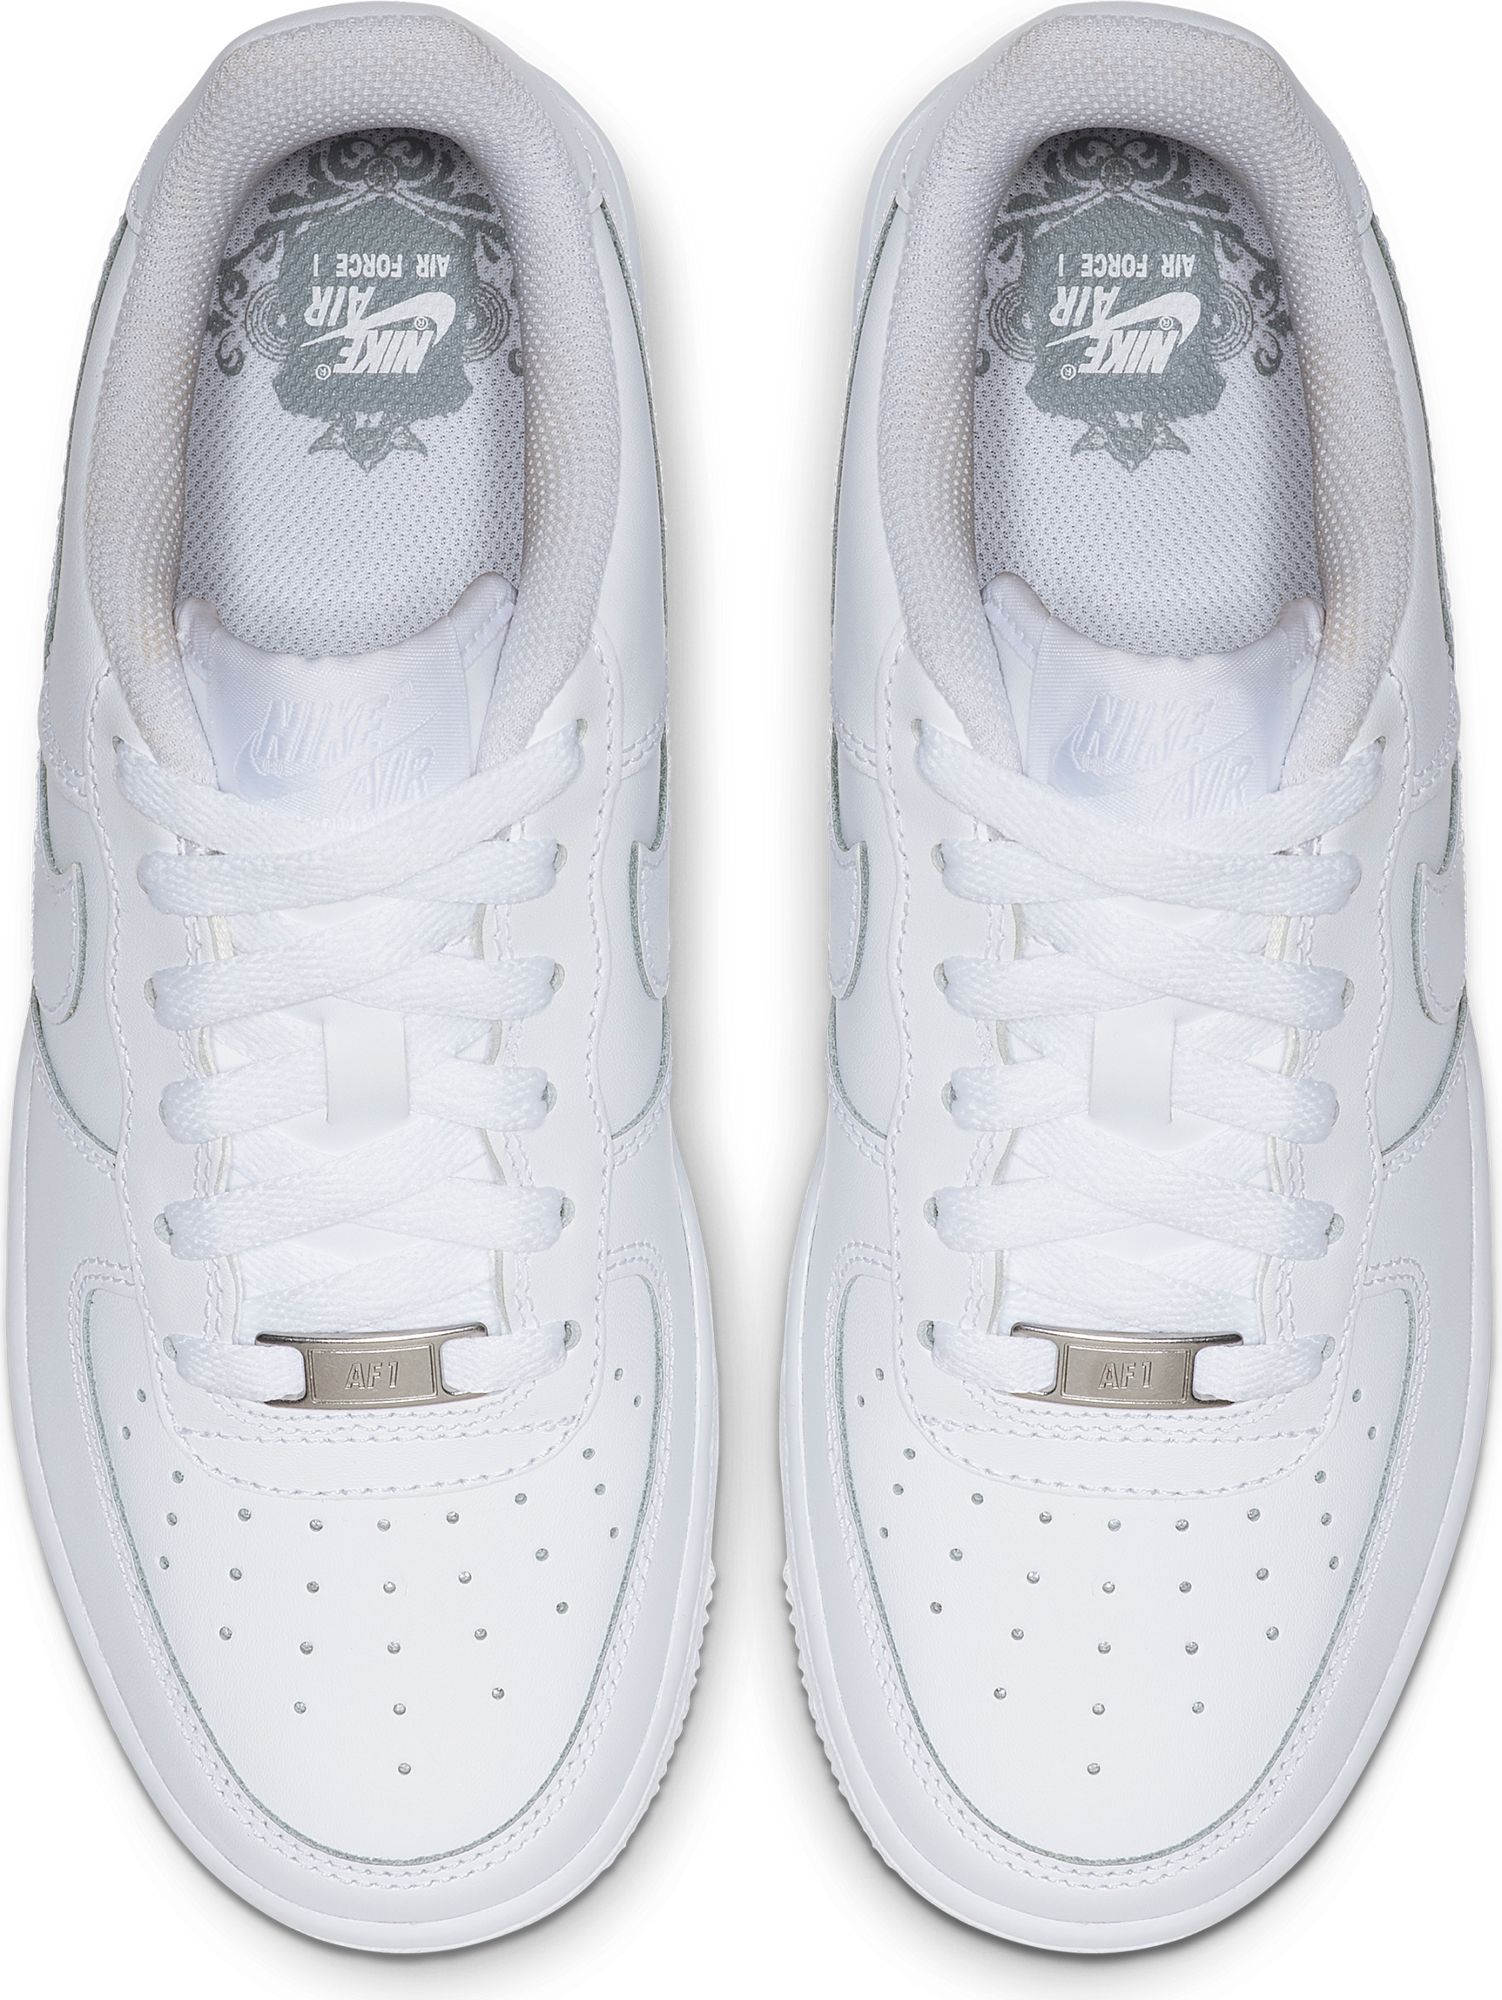 air force 1 size 5.5 youth white